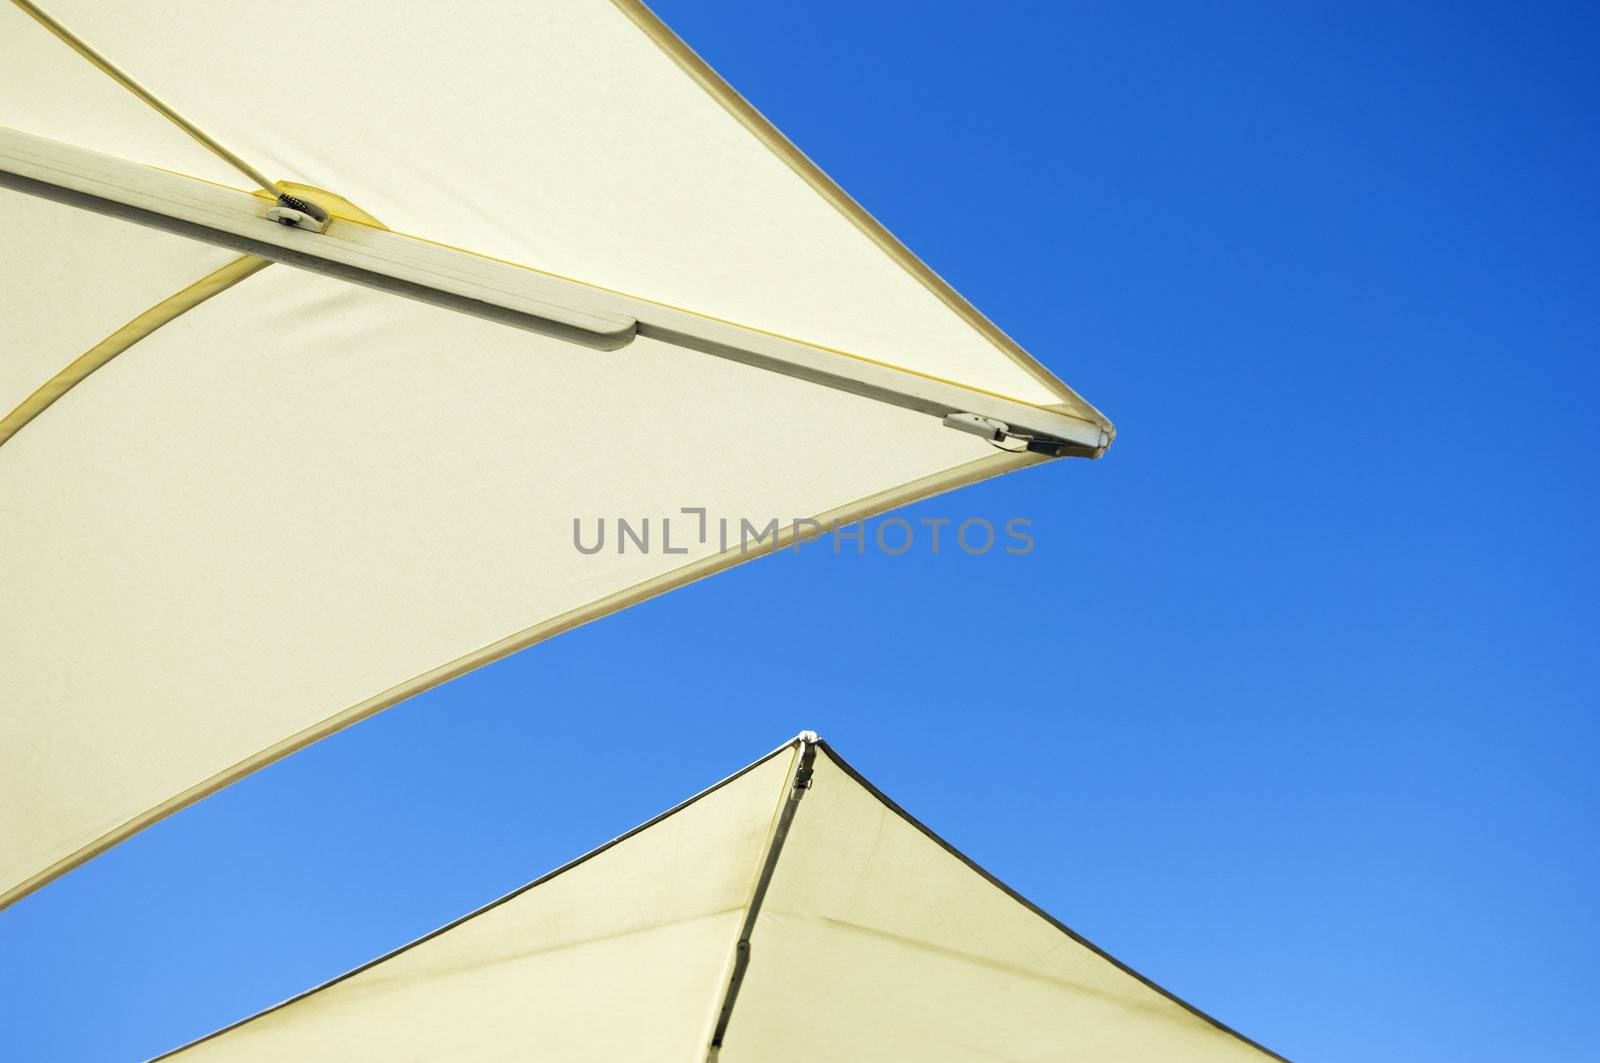 The edges of two white umbrellas in front of blue sky sunny background